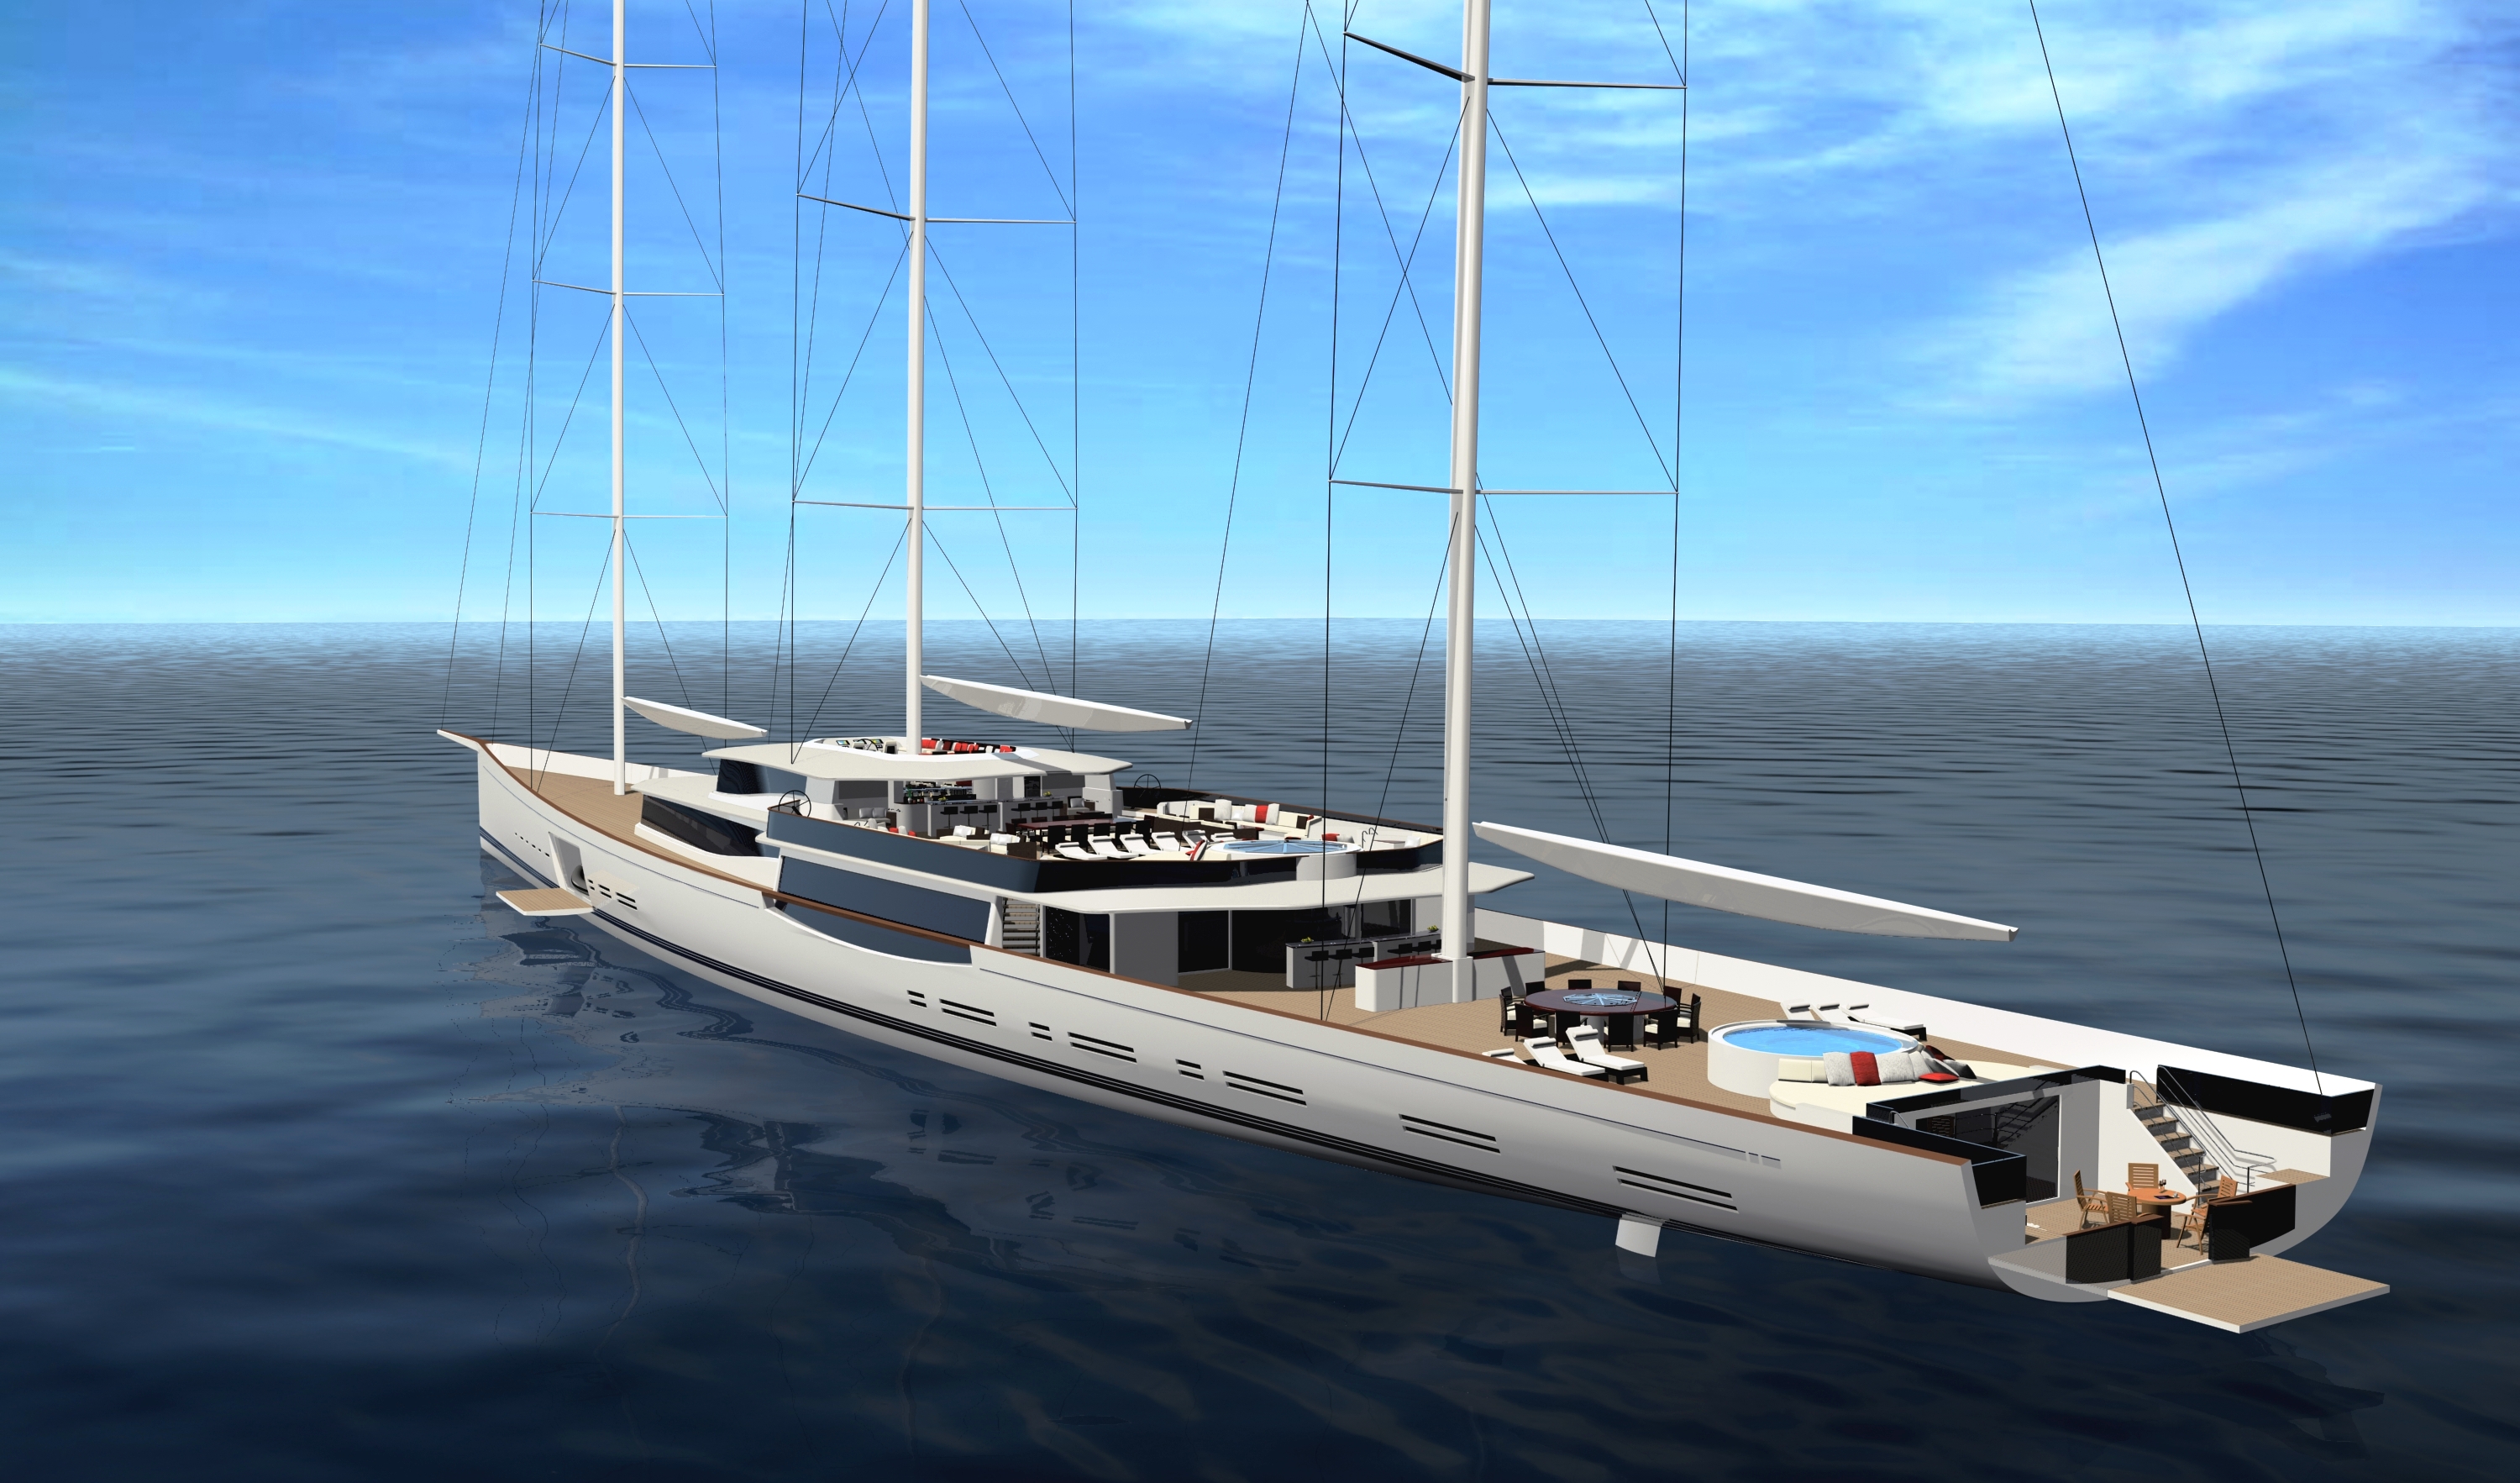  -sailing-yacht-by-Design-Unlimited-and-Reichel-Pugh-Yacht-Design-.jpg